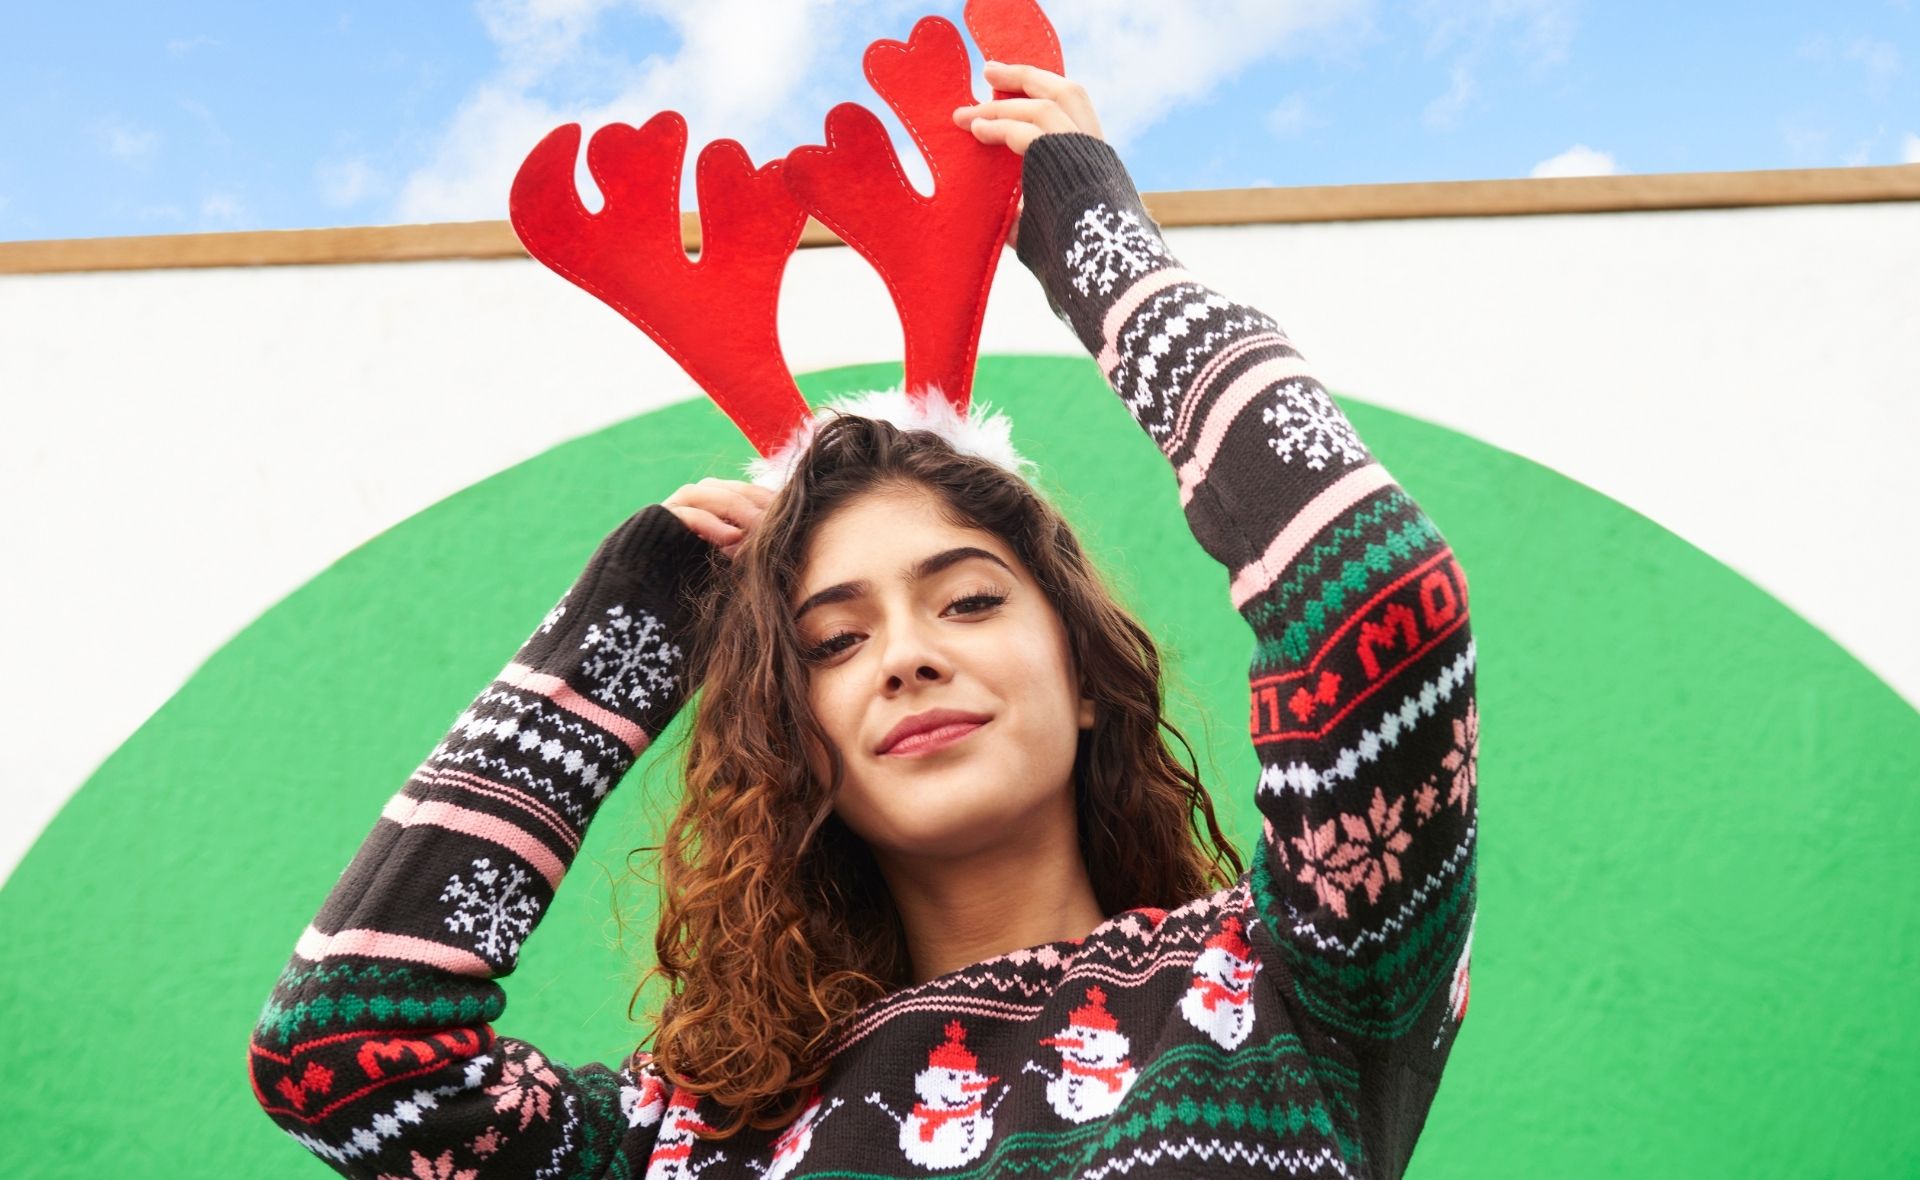 From the ugly to the cute, these Christmas themed jumpers and T-shirts will spread endless joy